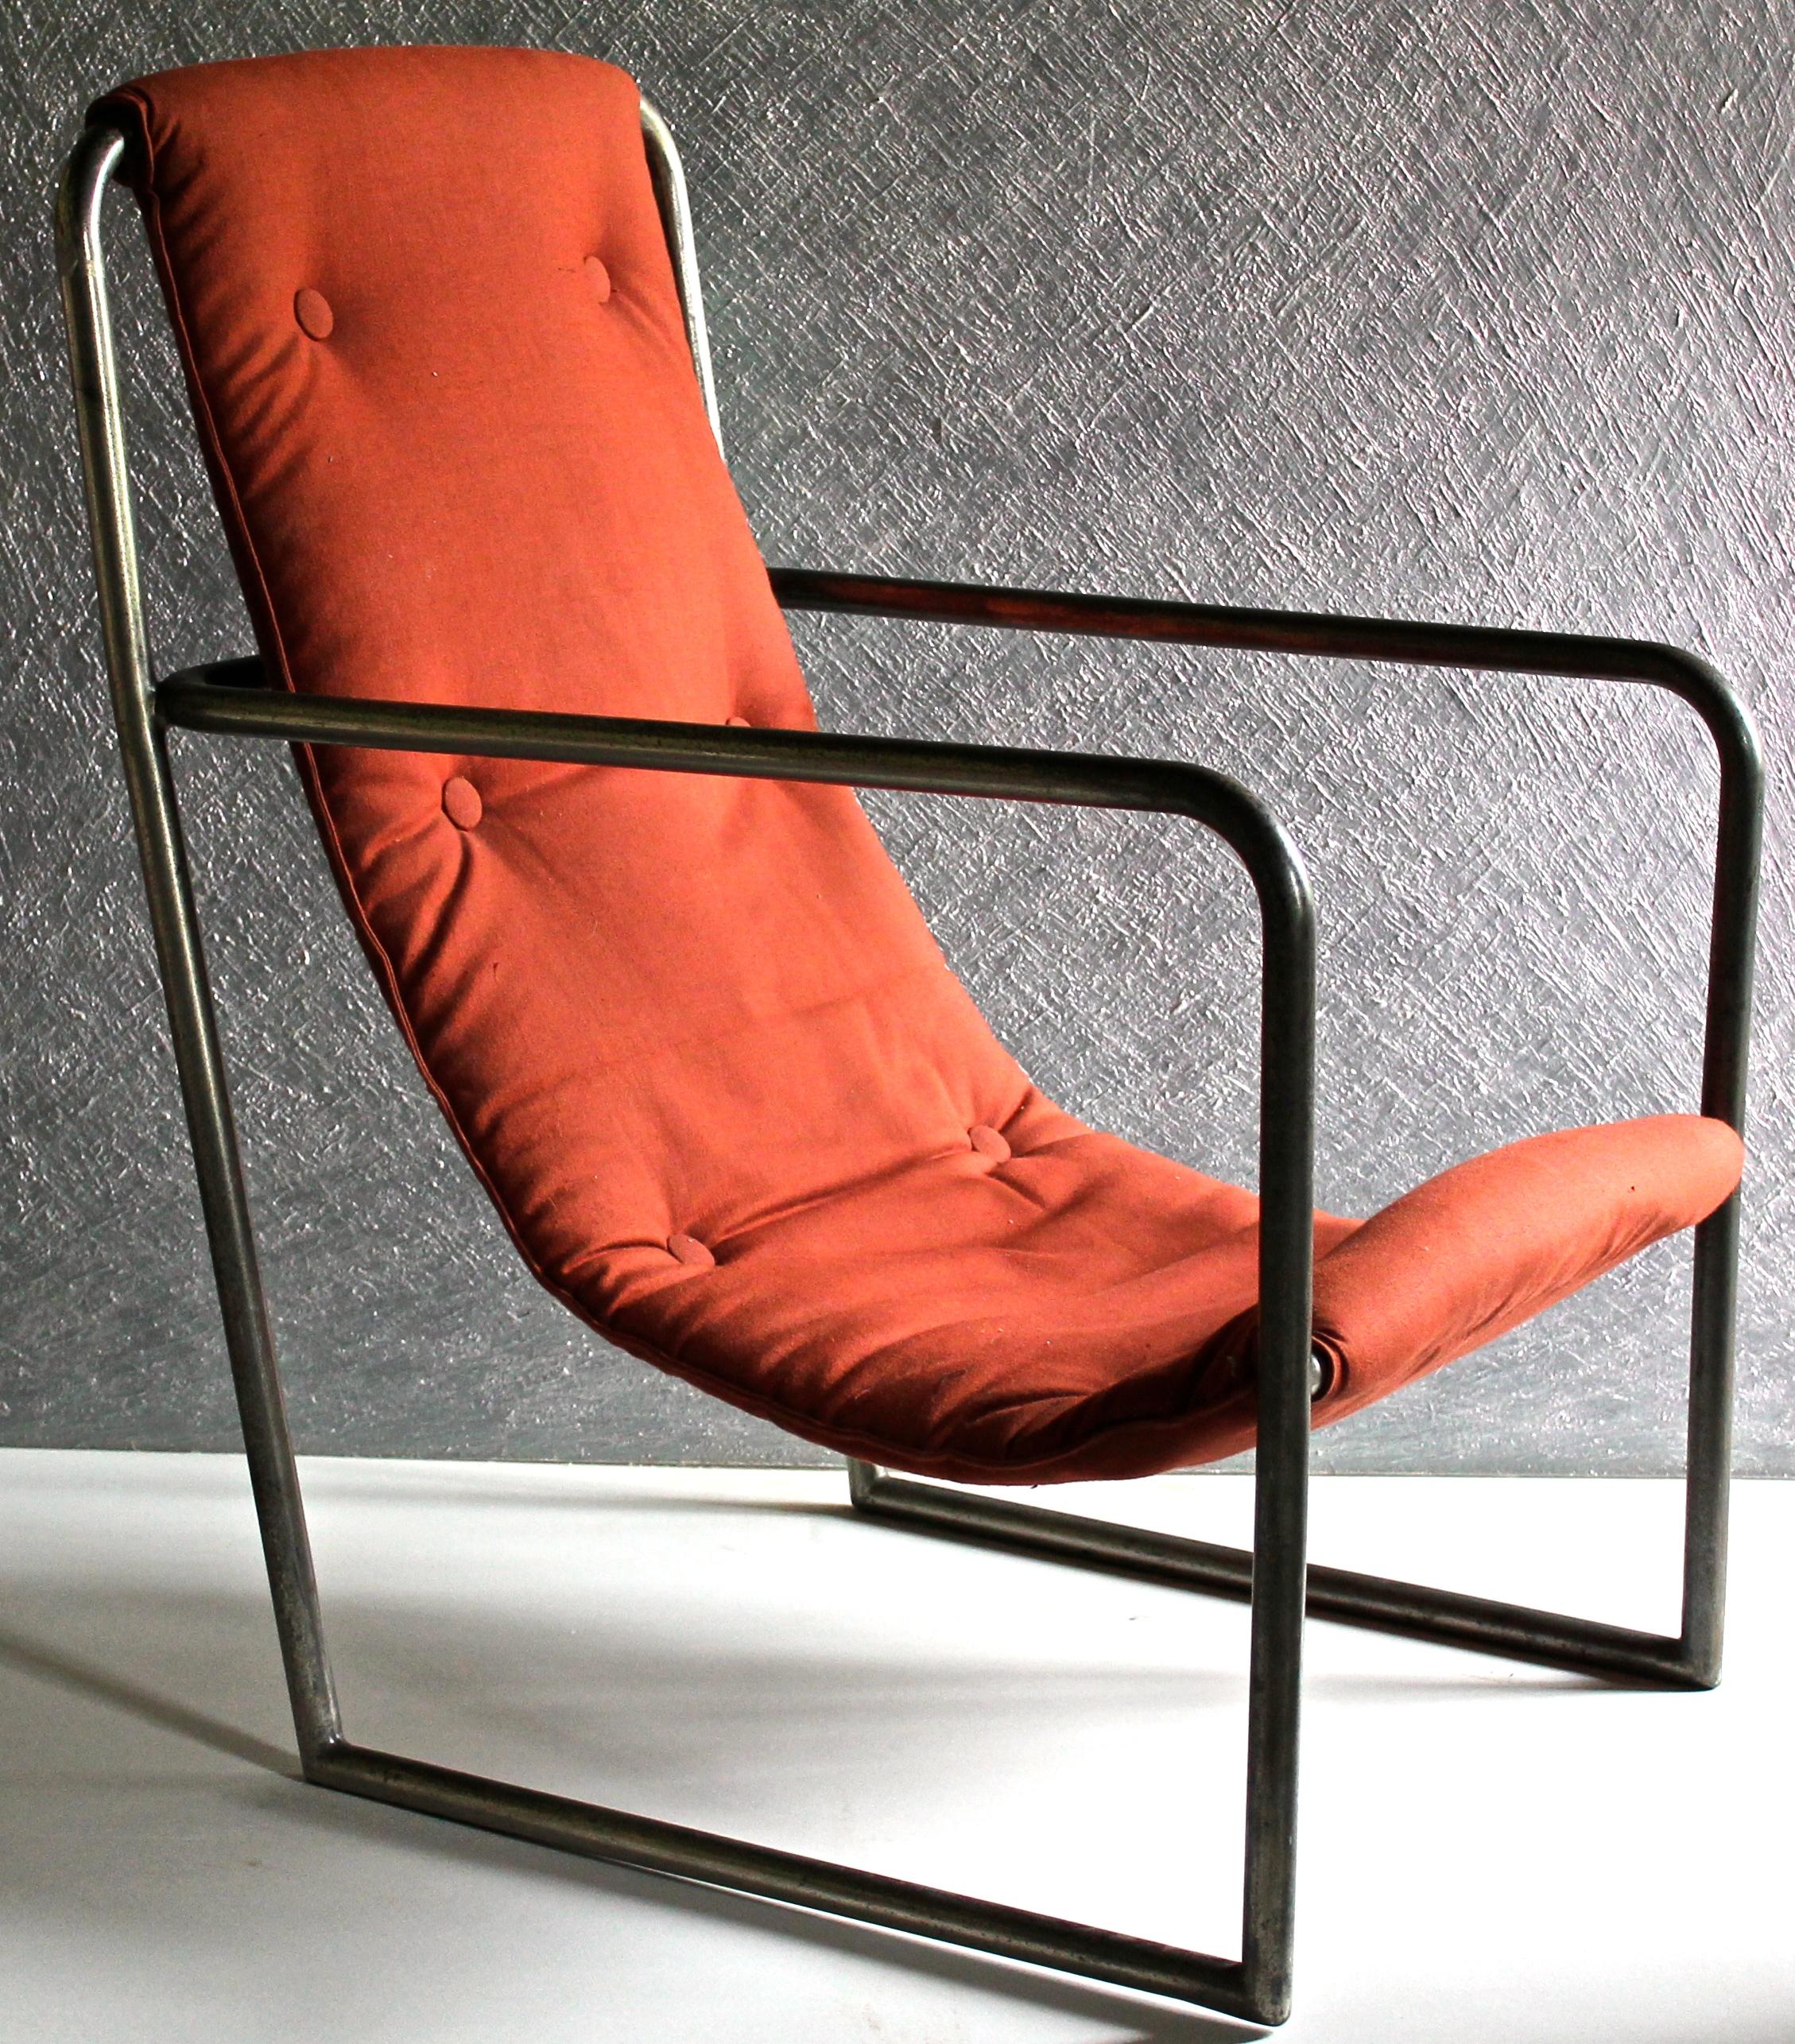 Welded steel and canvas upholstered 'sling' armchair designed by Louis Sognot and Maurice Dufrene for a 1928 La Maitrise installation. Extremely rare, perhaps a unique survivor. Period (1928) en situ photo depicting the model from: 'The Decorative